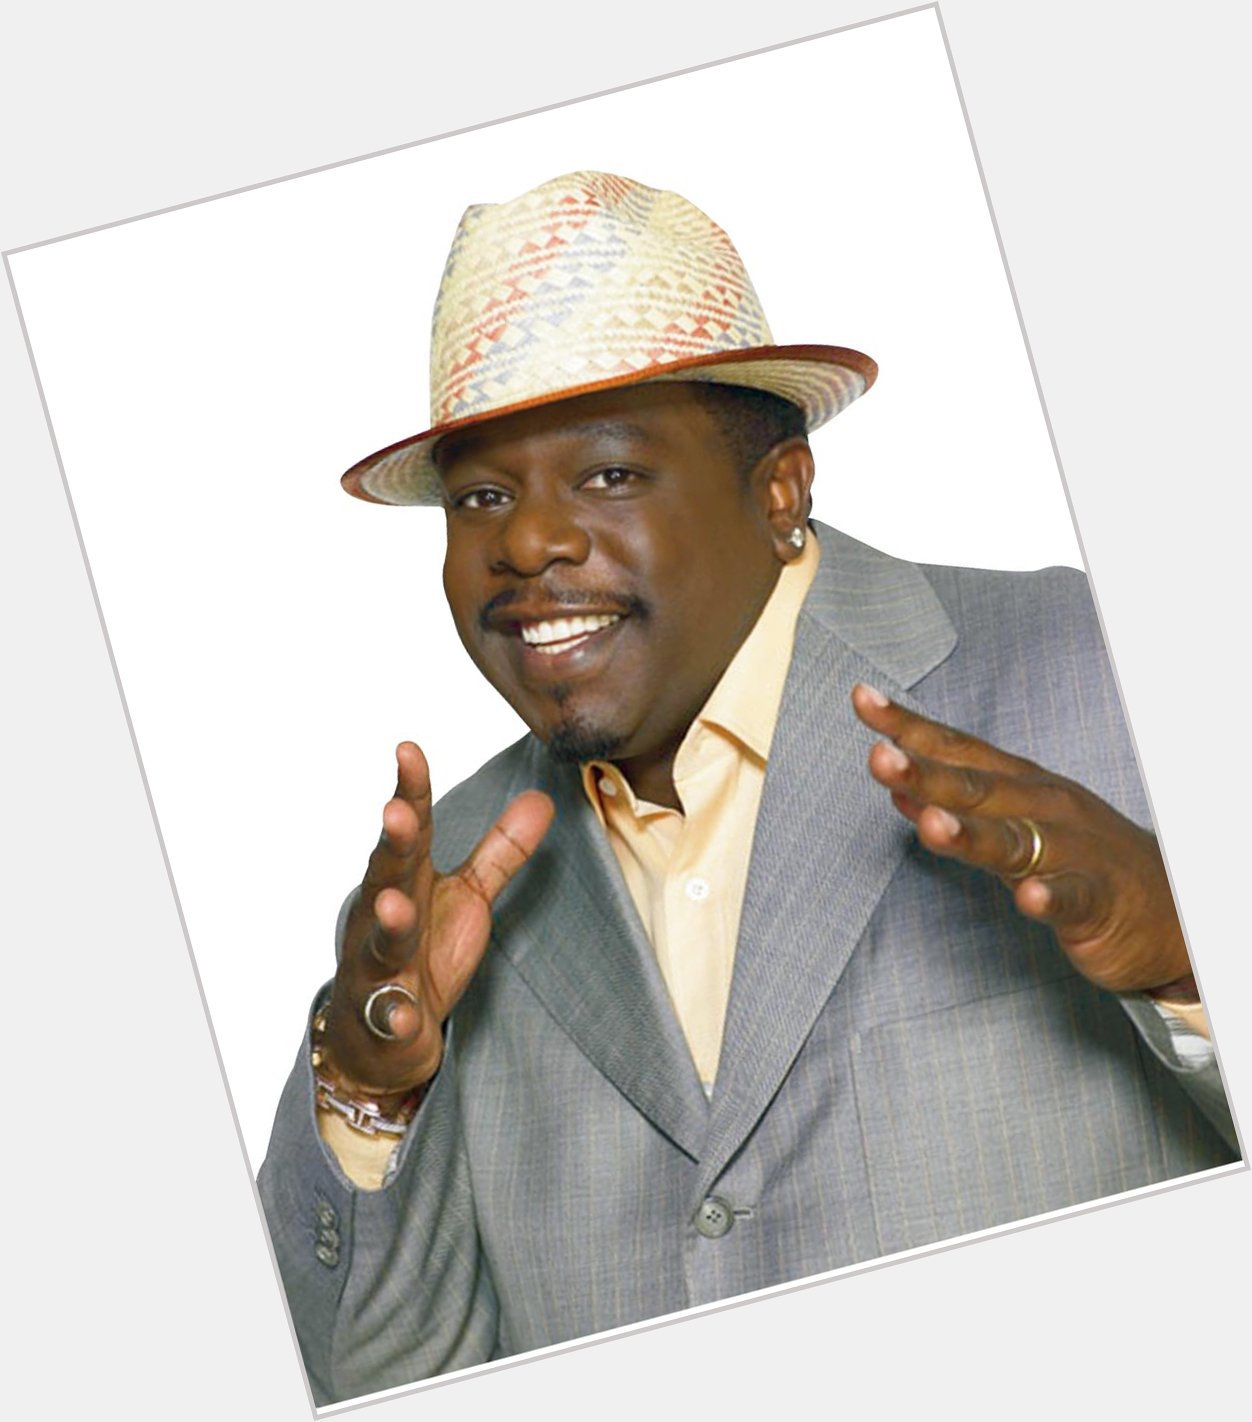 Happy Birthday to Cedric the Entertainer, who turns 51 today! 